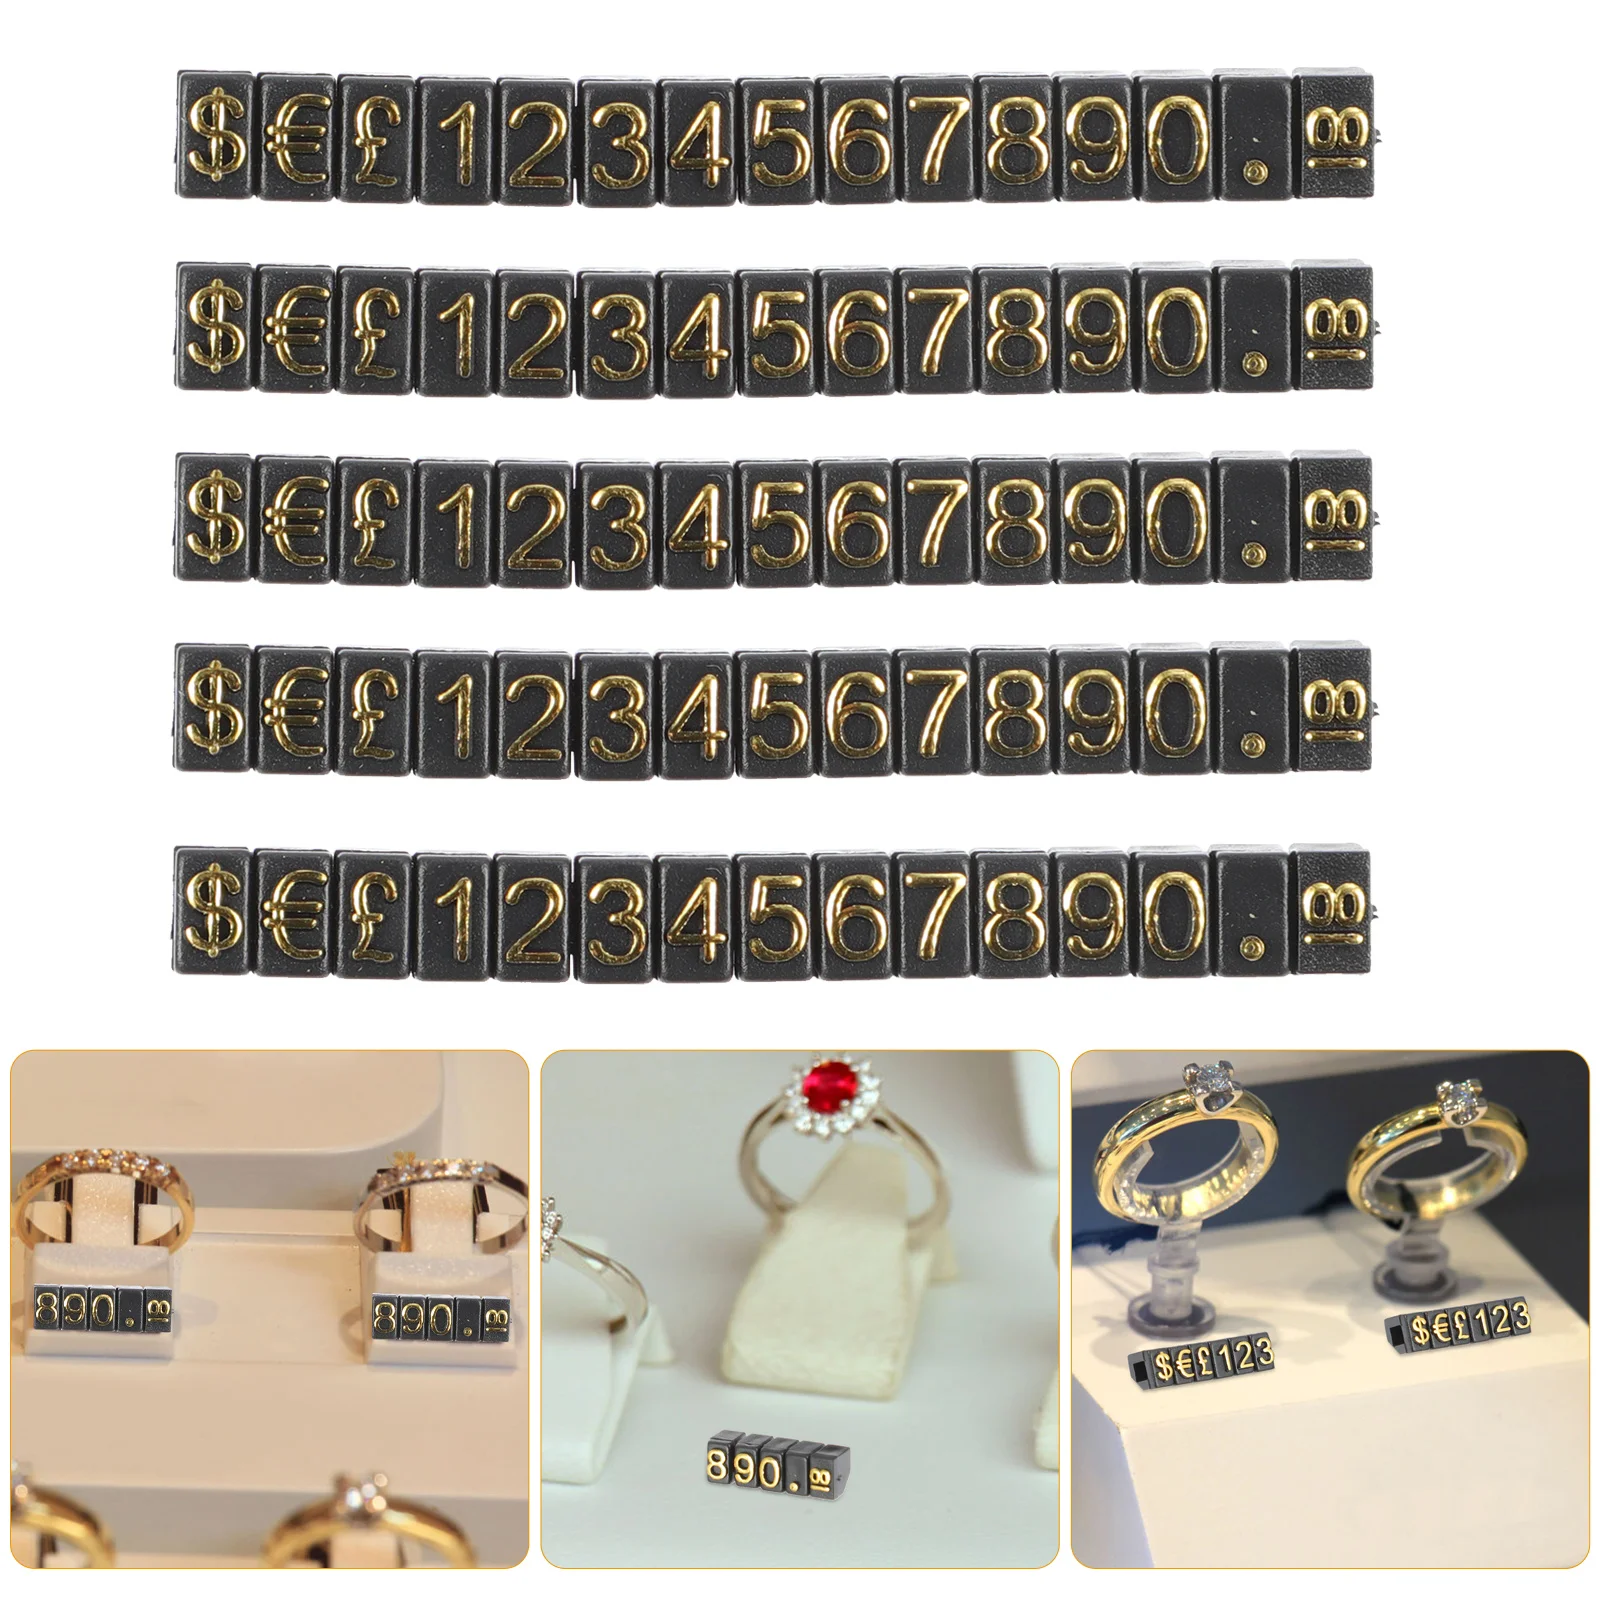 

10 Pcs Price Tag Jewelry Labels Number Tags Display Stand Supermarket Digital Sign Boards Commodity Can Move Store